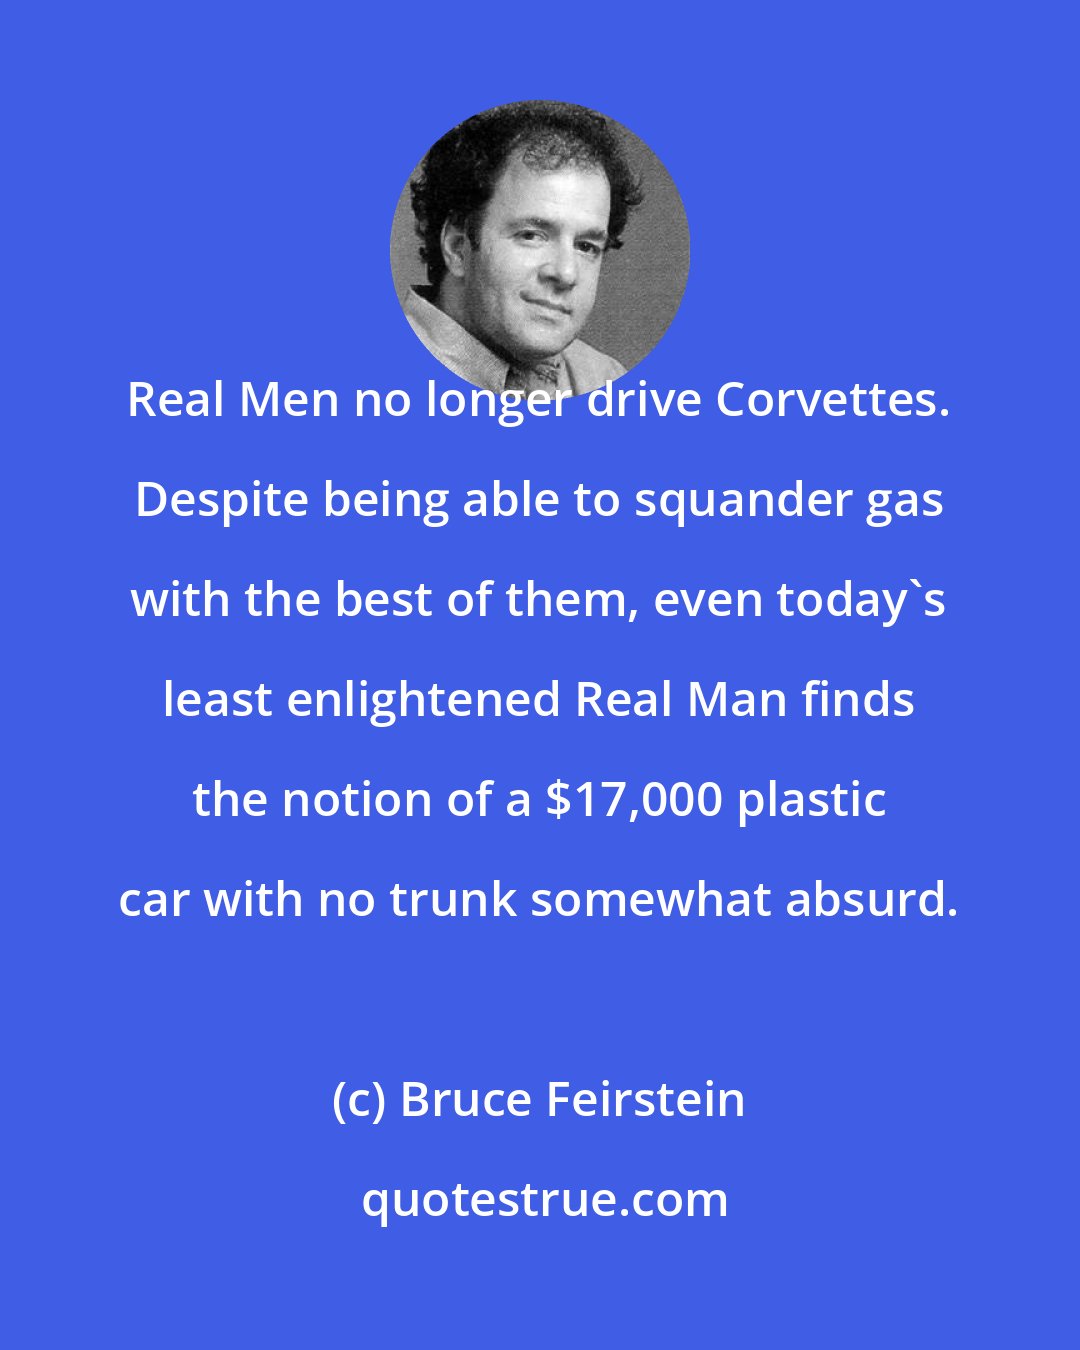 Bruce Feirstein: Real Men no longer drive Corvettes. Despite being able to squander gas with the best of them, even today's least enlightened Real Man finds the notion of a $17,000 plastic car with no trunk somewhat absurd.